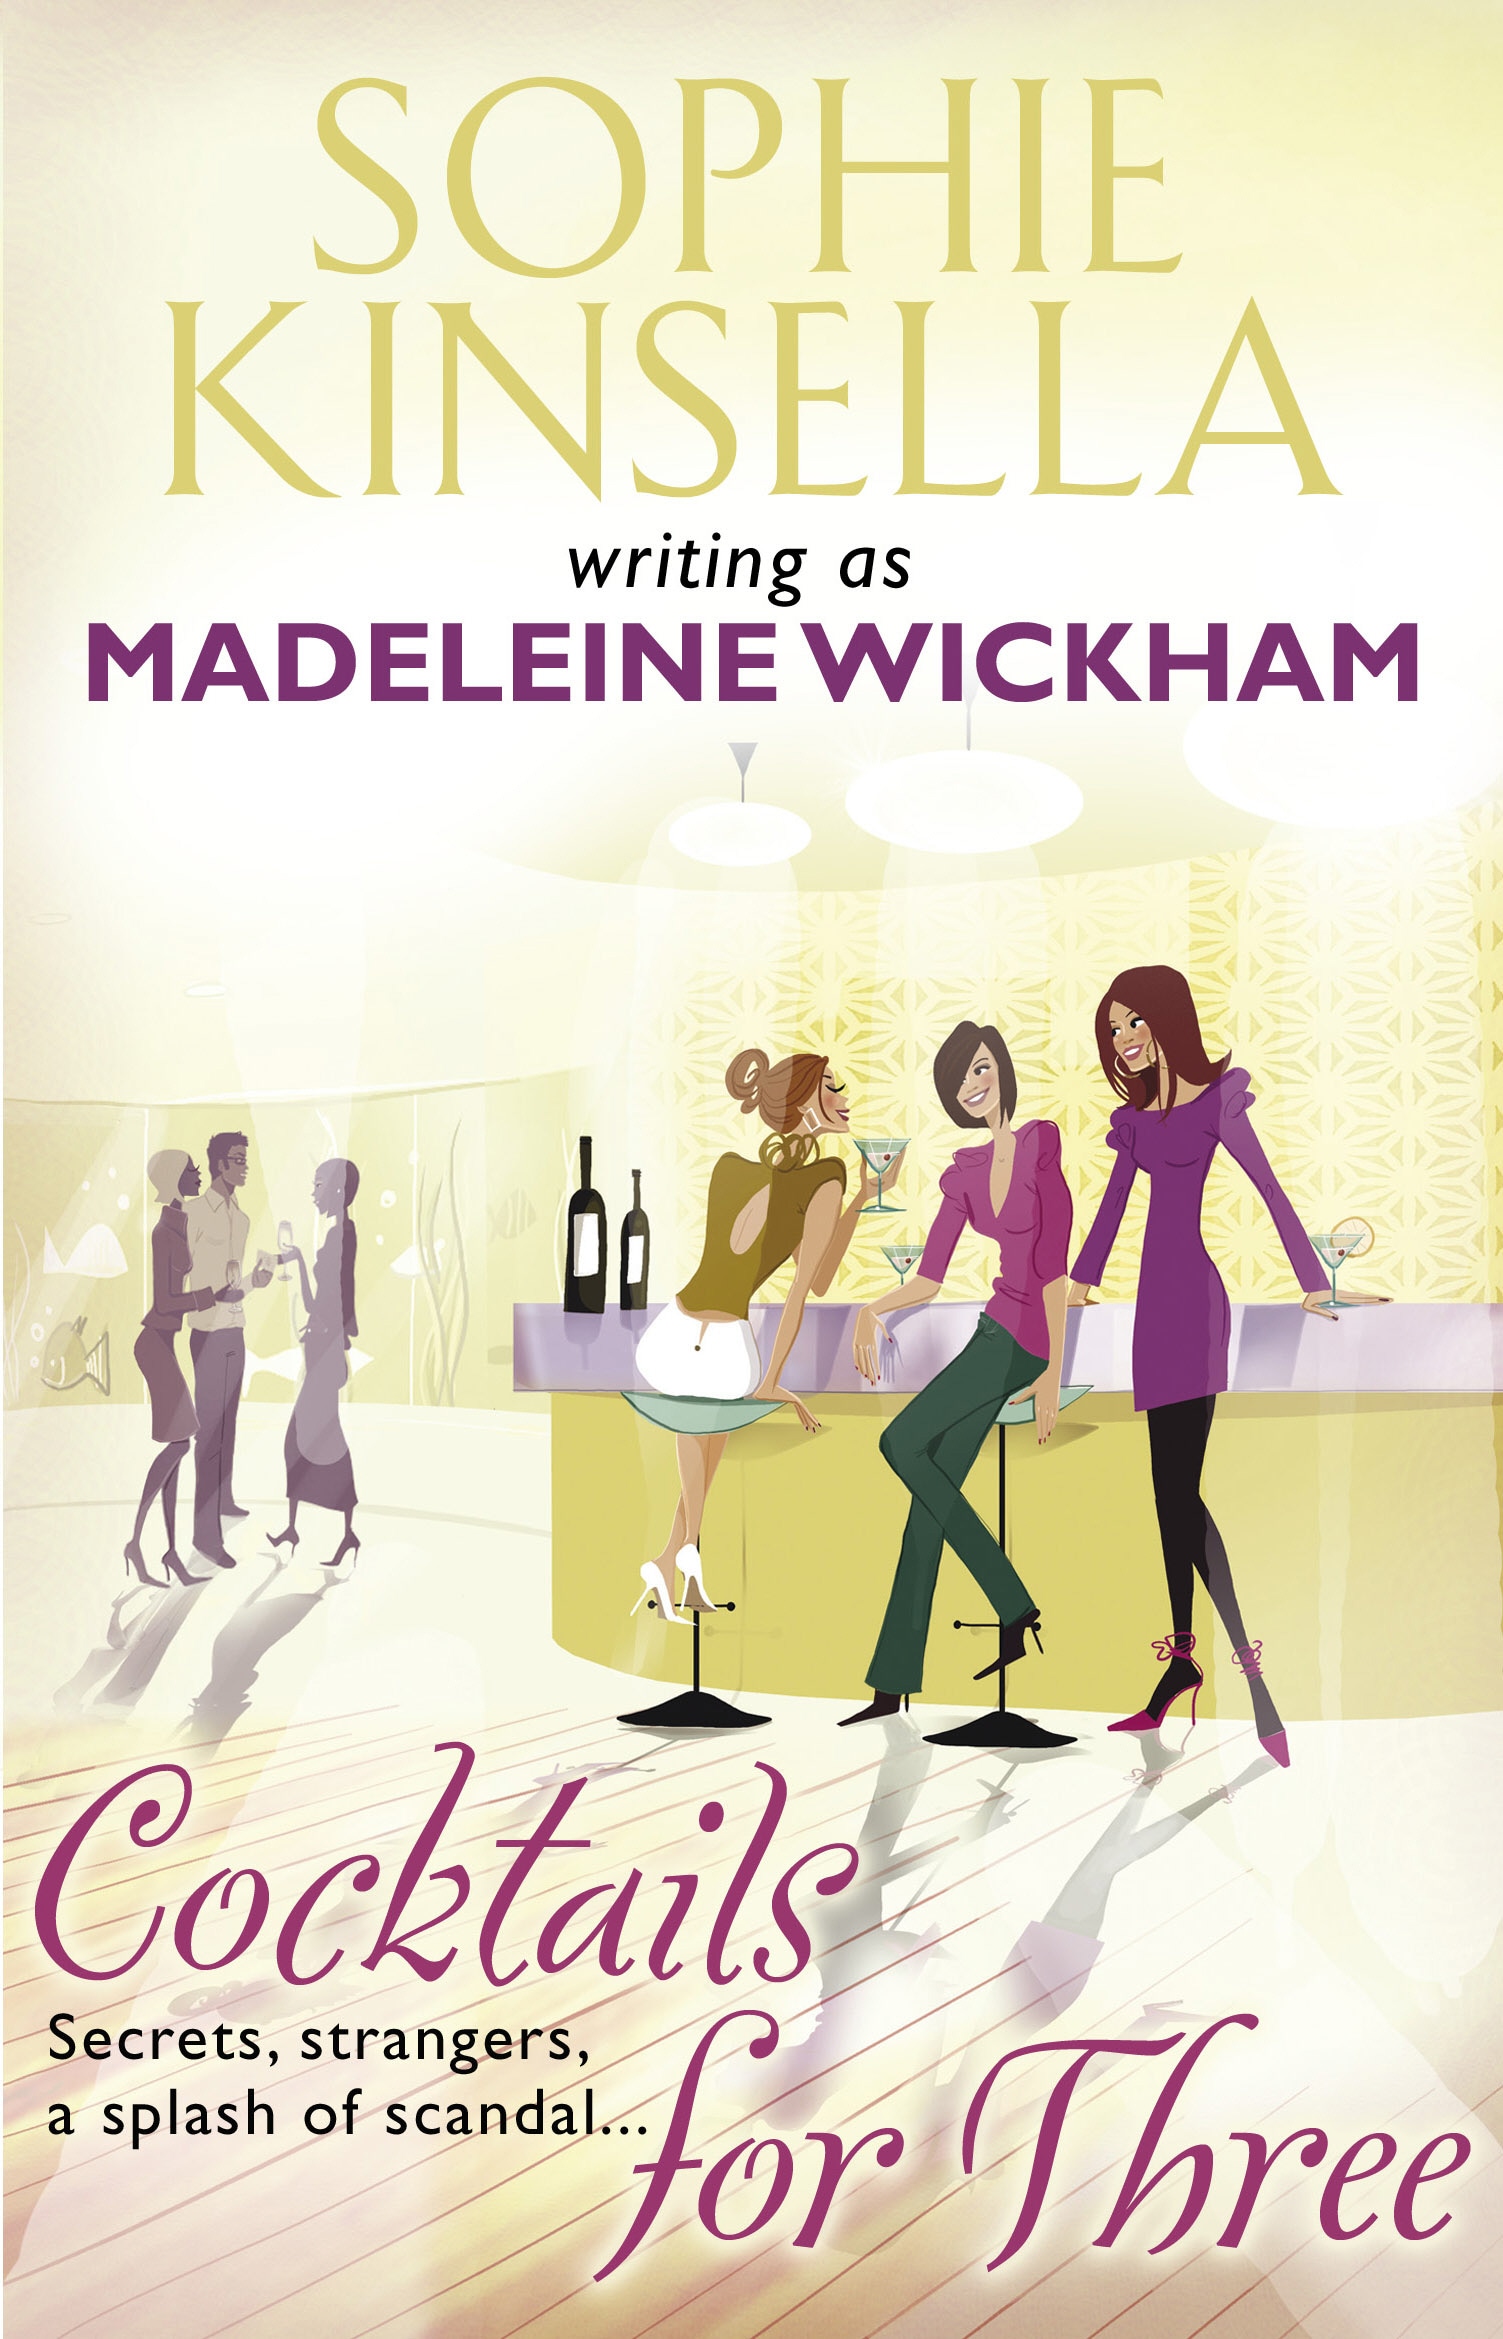 Book “Cocktails For Three” by Sophie Kinsella — August 19, 2010